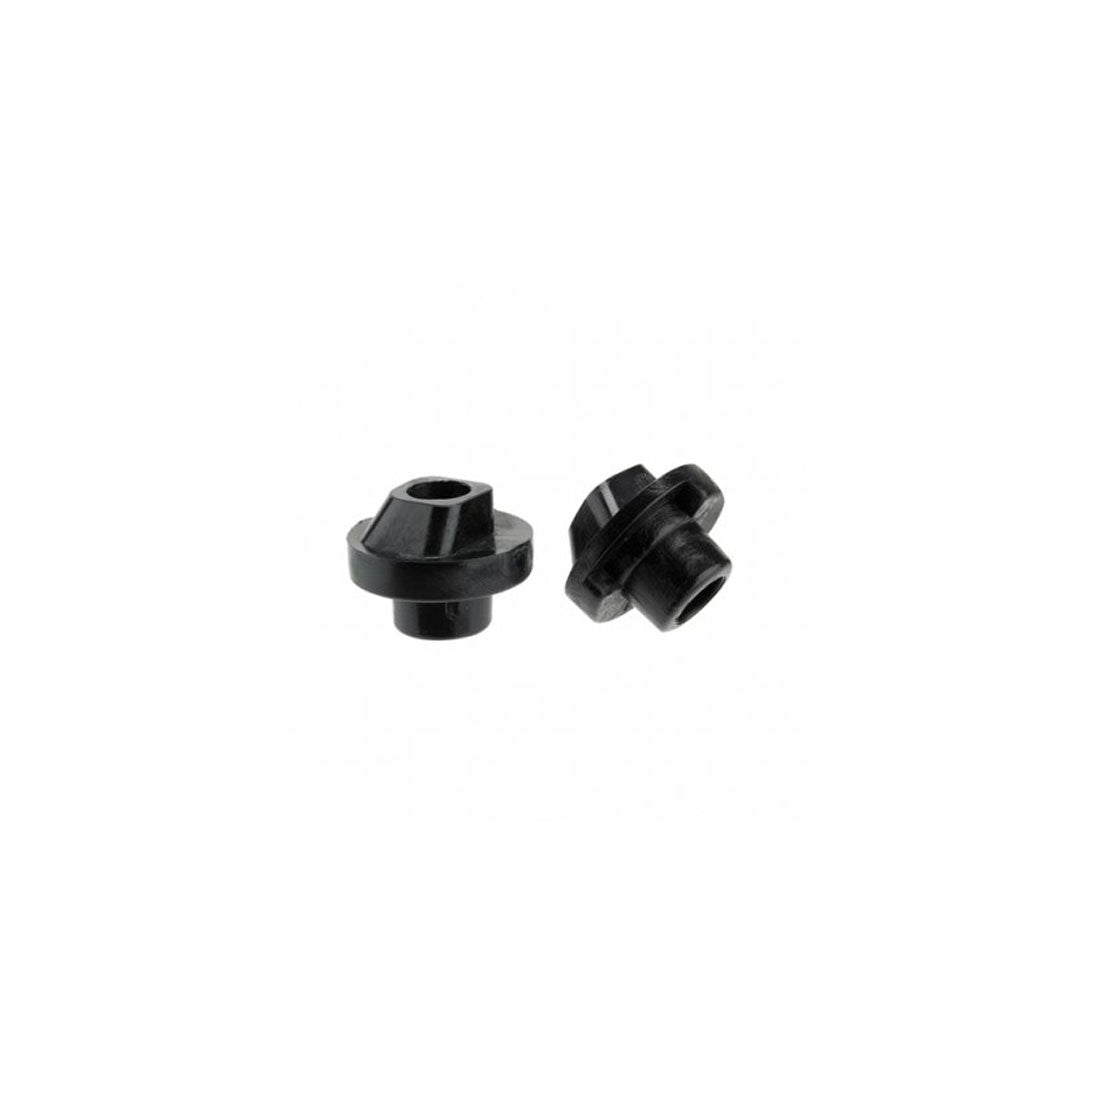 Micro Mini/Maxi Stop Washers L&R 2pk - 1146 Scooter Hardware and Parts